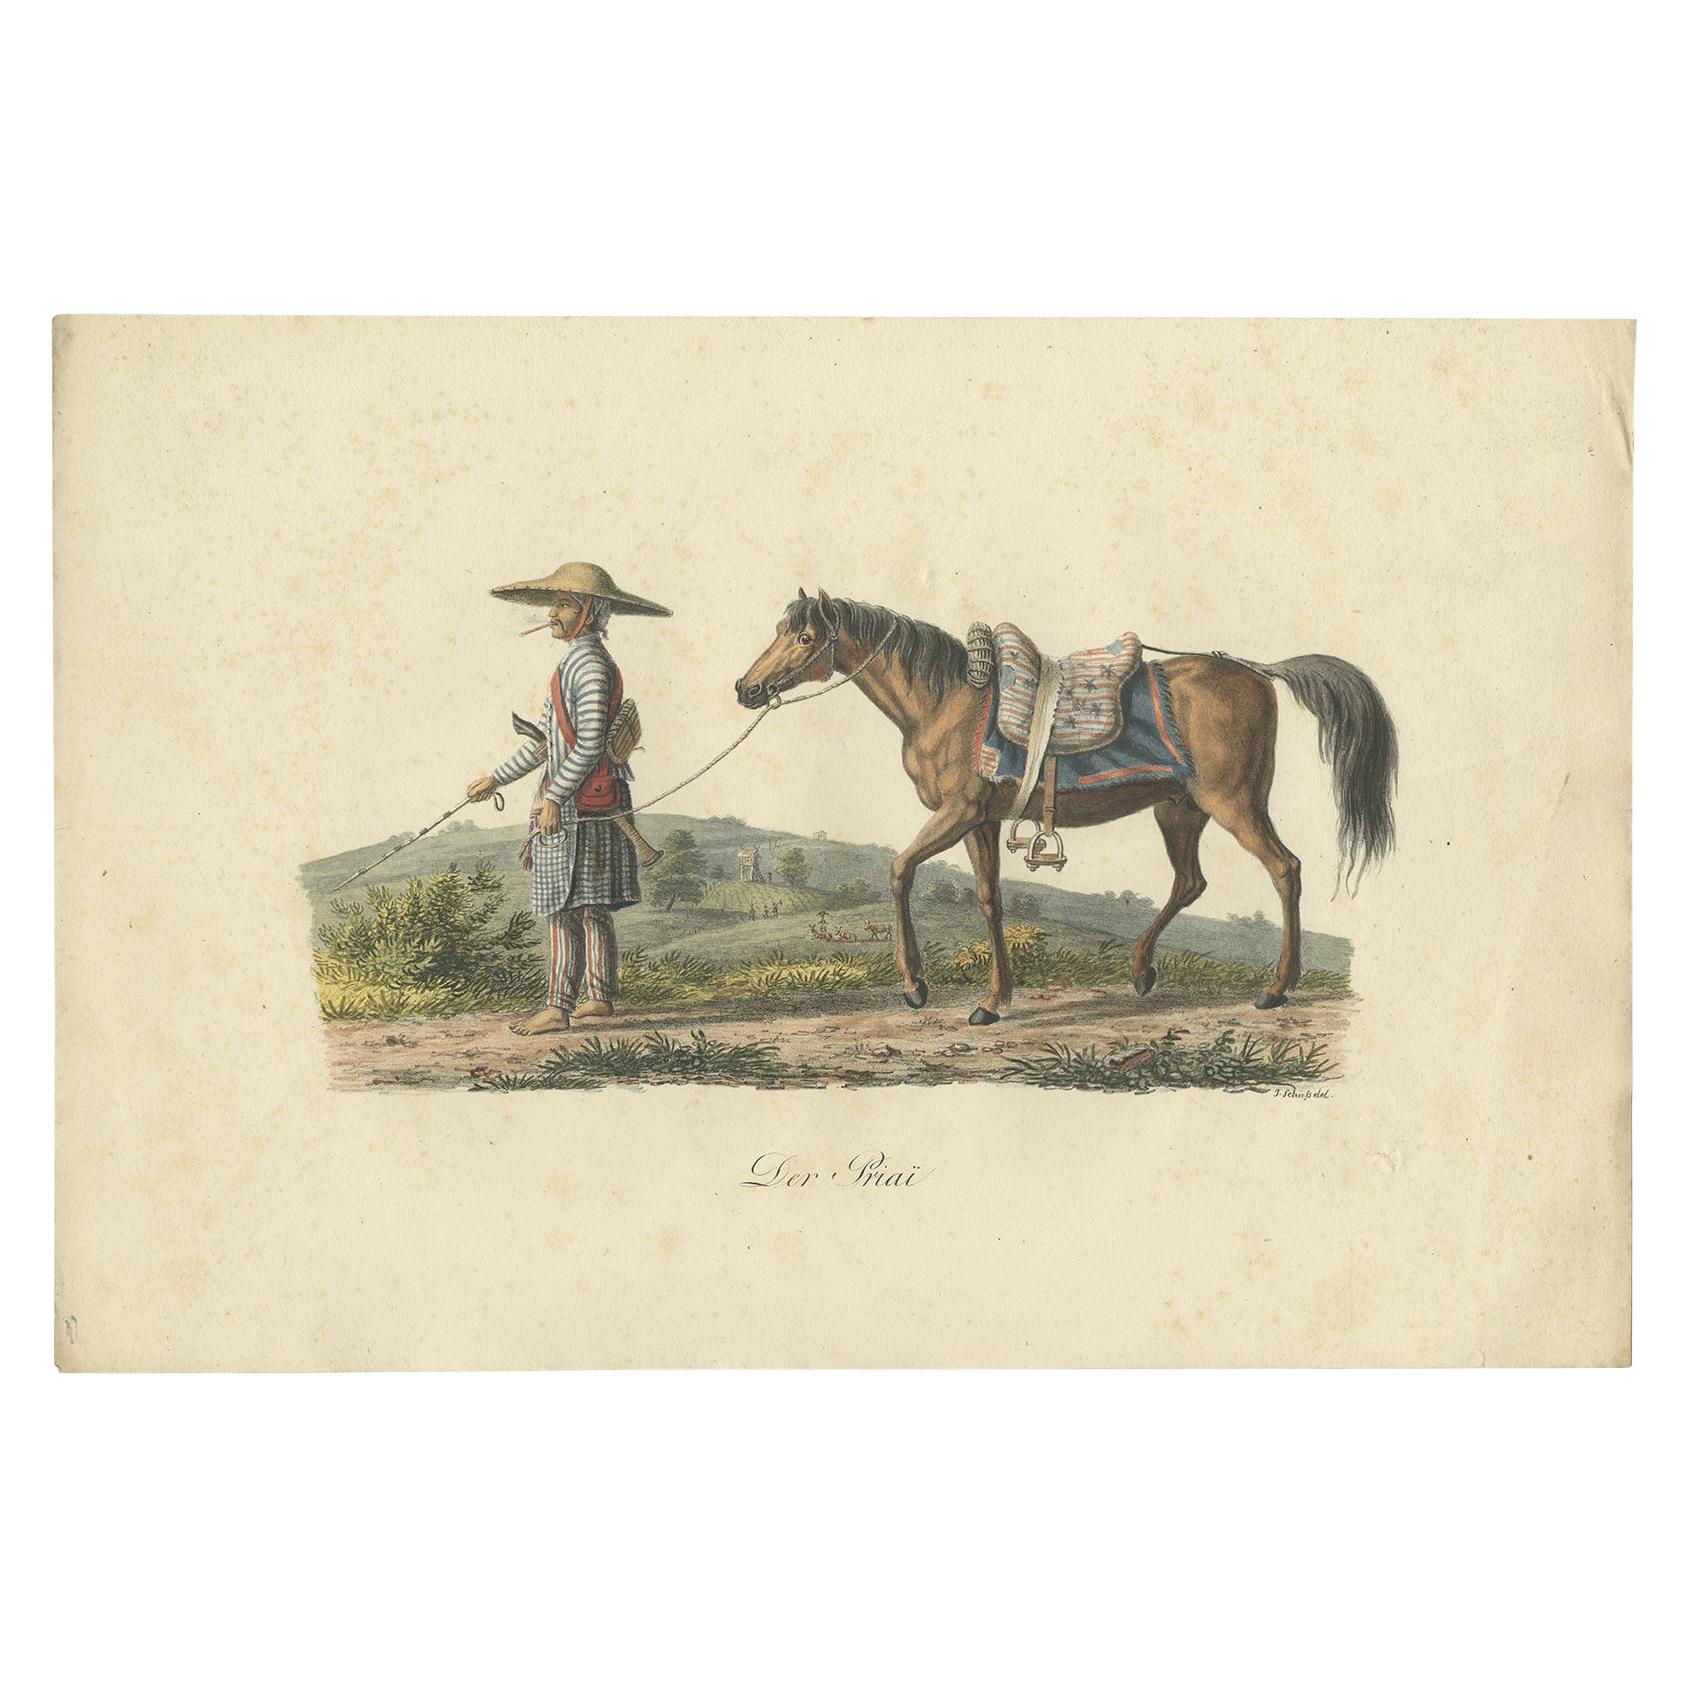 Antique Print of a Civil Servant from Java by Hurter 'circa 1830' For Sale